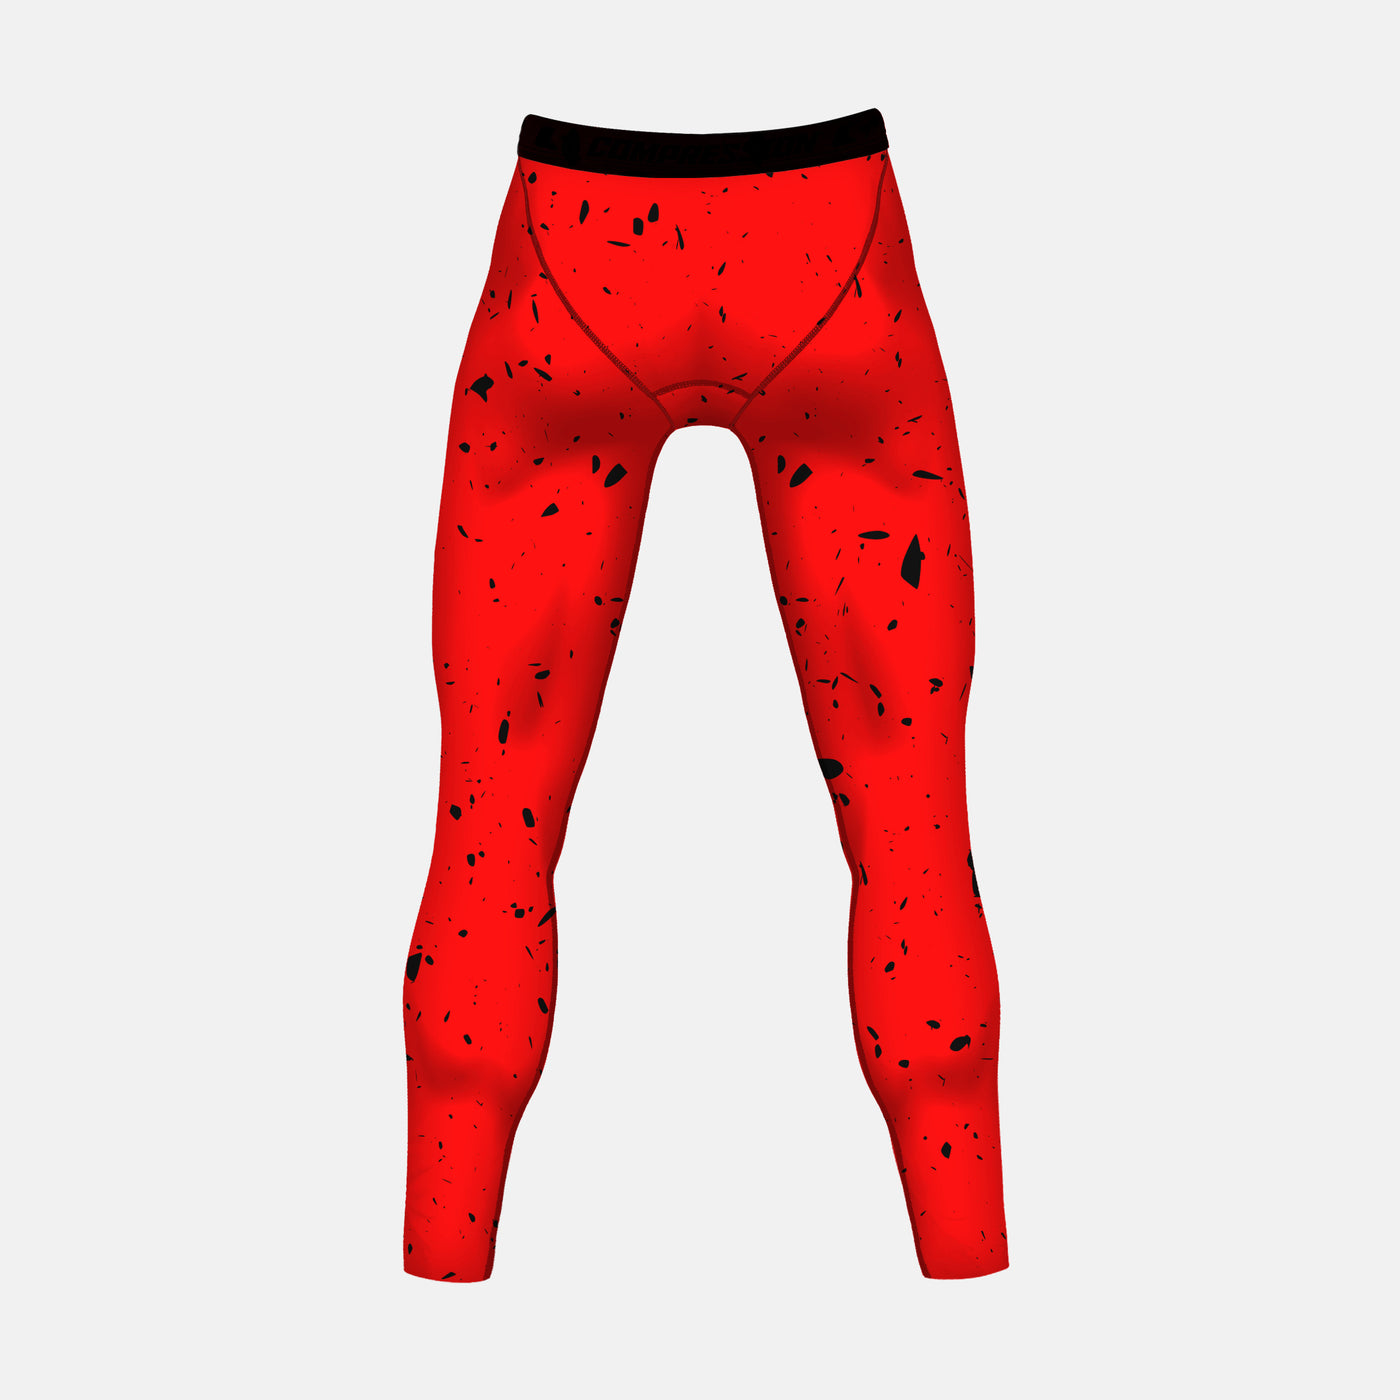 Concrete Red Tights for Men